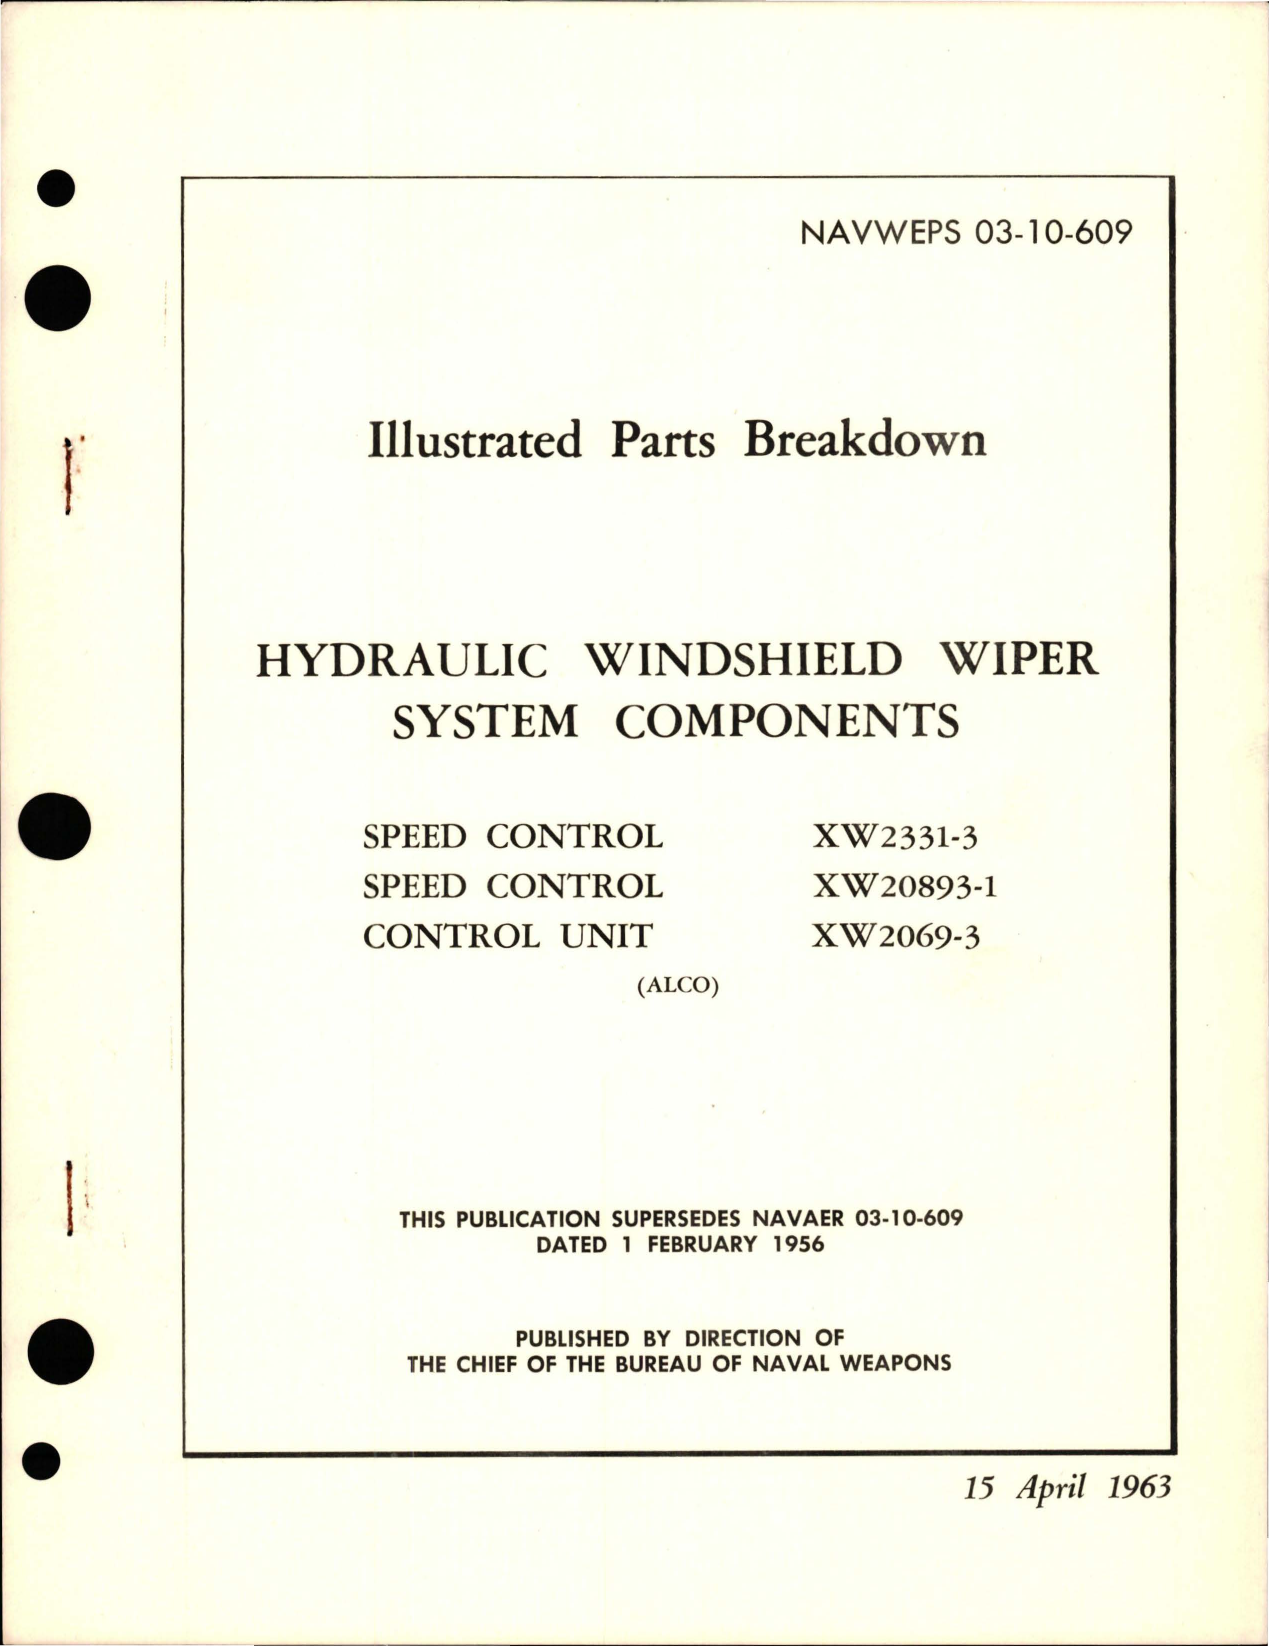 Sample page 1 from AirCorps Library document: Illustrated Parts Breakdown for Hydraulic Windshield Wiper System Components - Speed Control XW2331-3 and 20893-1 - Control Unit XW2069-3